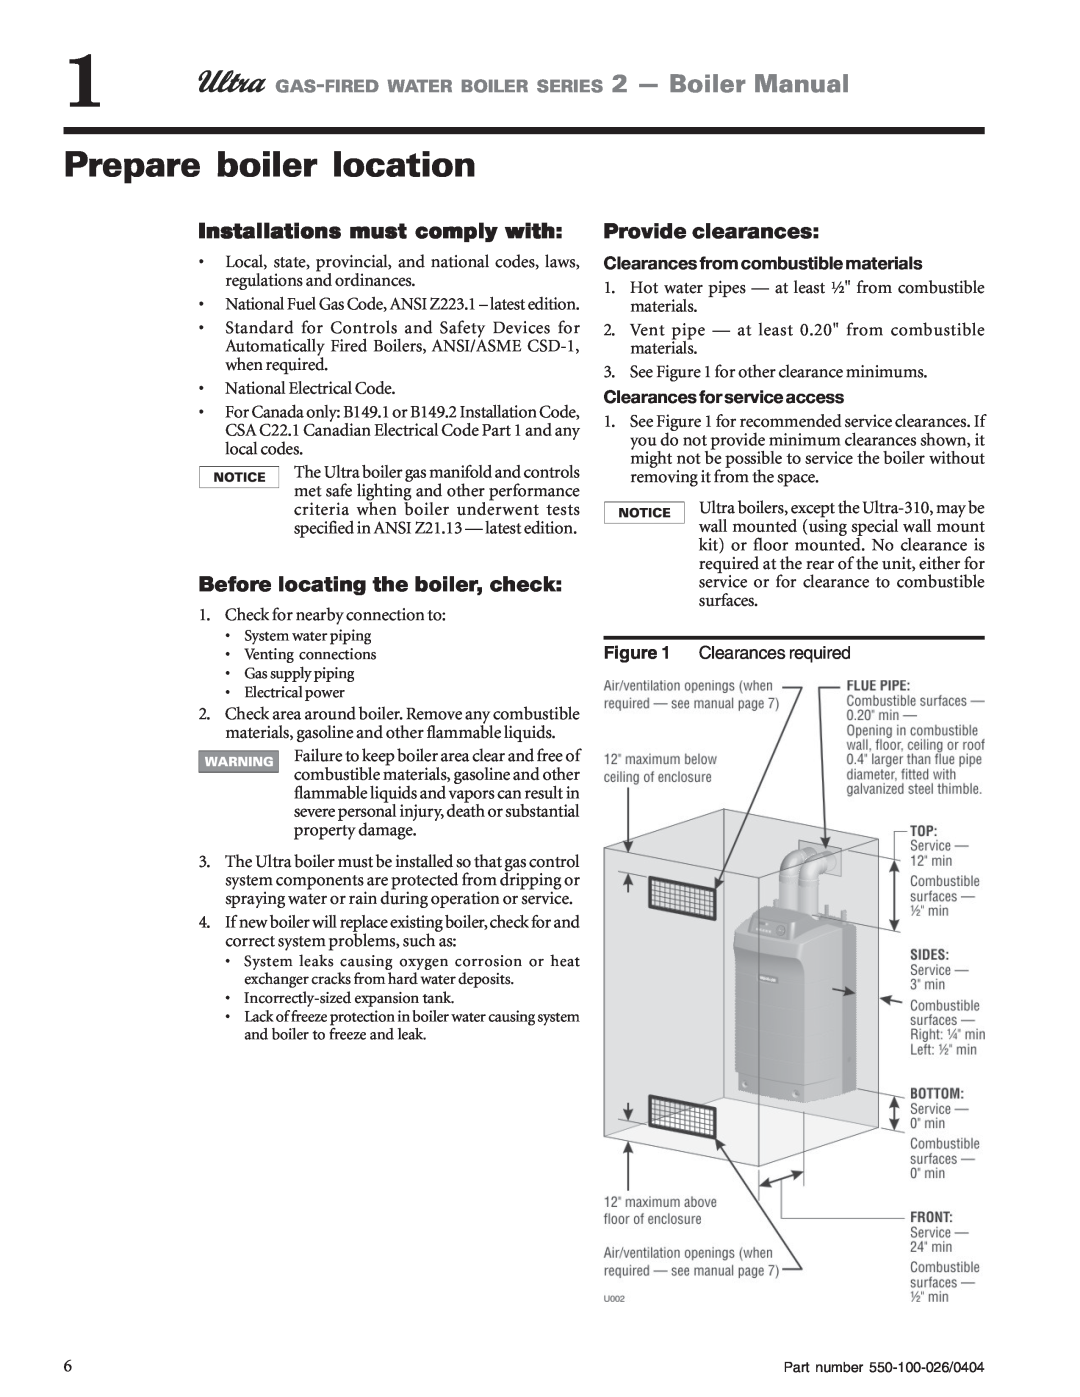 Ultra electronic 230 & -310, 80 Prepare boiler location, Installations must comply with, Before locating the boiler, check 